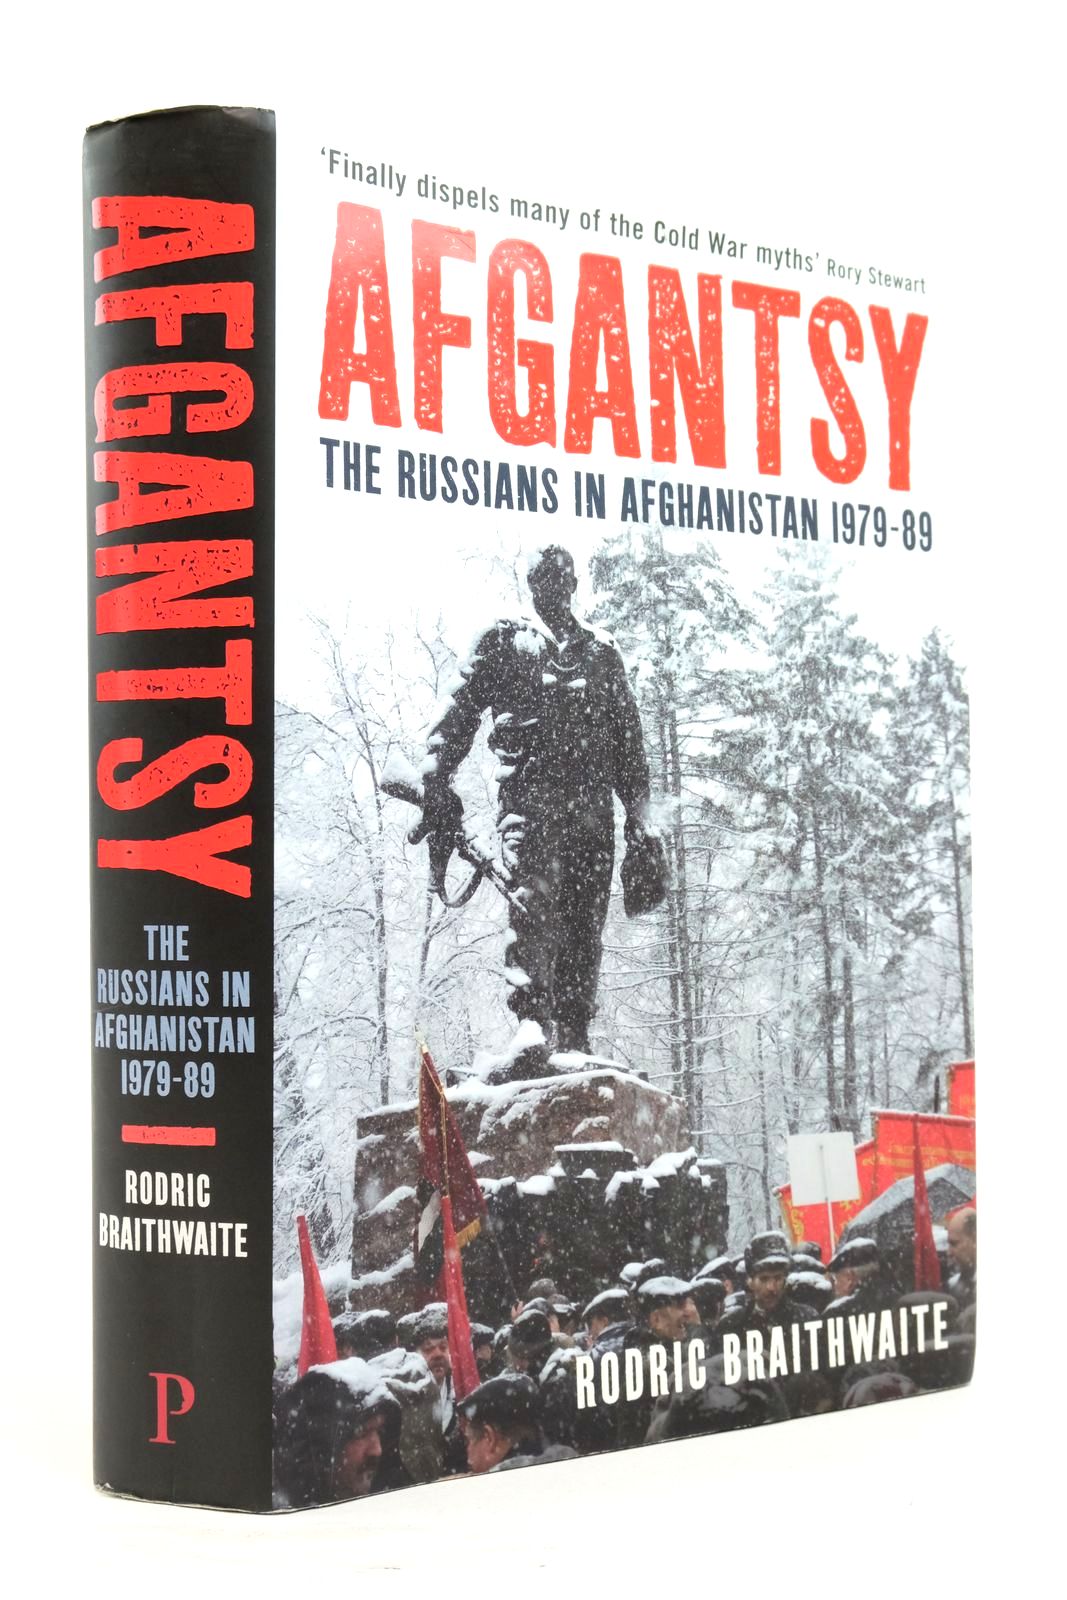 Photo of AFGANTSY: THE RUSSIANS IN AFGHANISTAN 1979-89 written by Braithwaite, Rodric published by Profile Books (STOCK CODE: 2137868)  for sale by Stella & Rose's Books